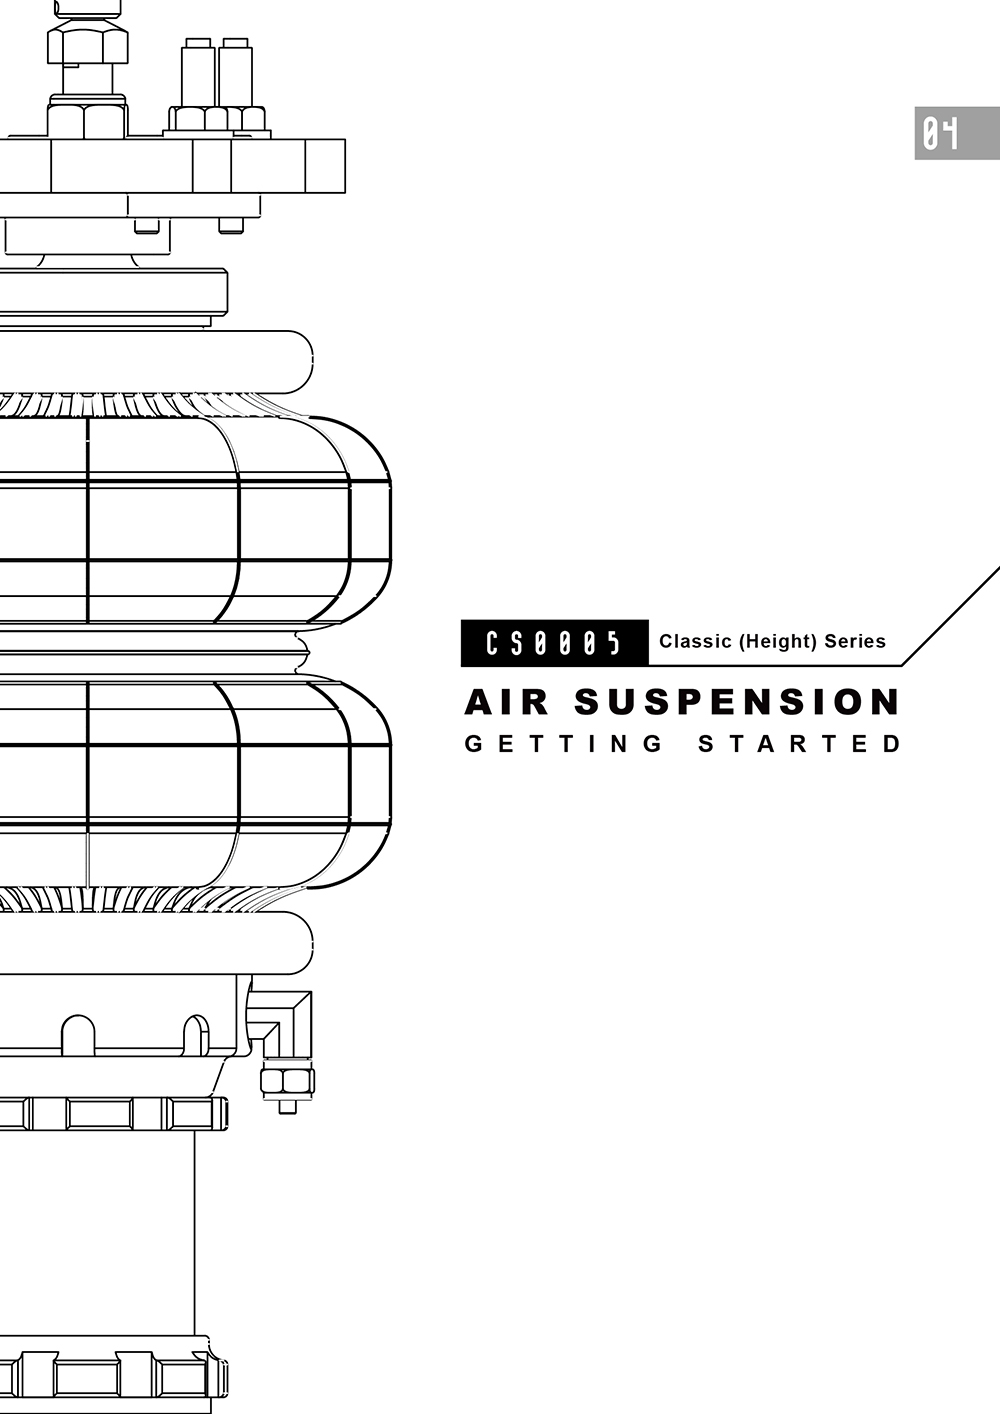 Air Management & air Suspension getting started (2021.11.02)